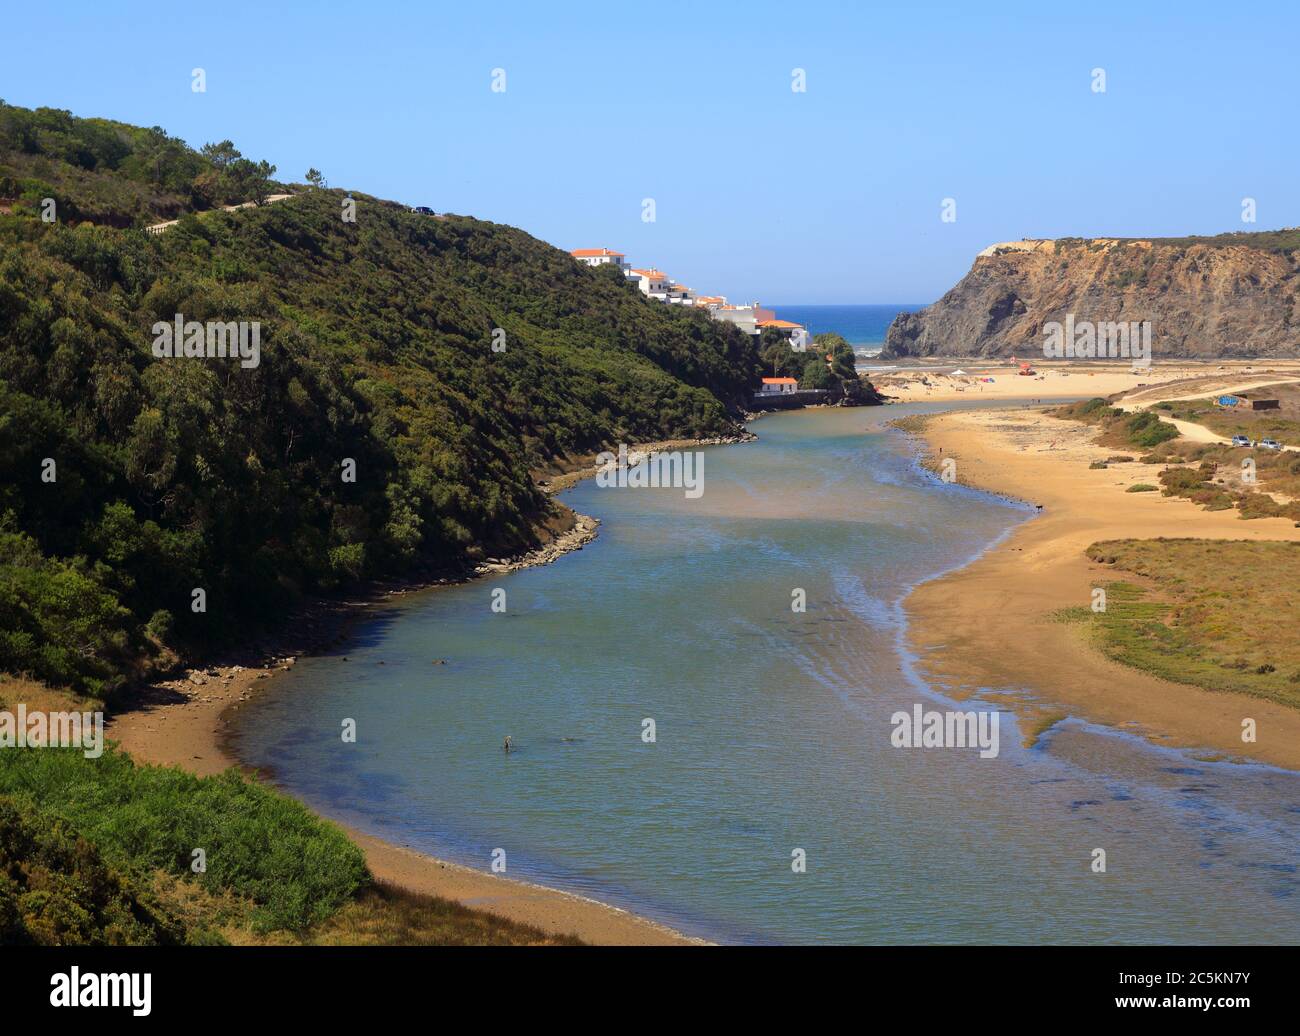 Portugal, Algarve Region, Odeceixe, South-West Alentejo and Vicentine Coast Natural Park cliff top view of the Odeceixe beach and estuary. Stock Photo